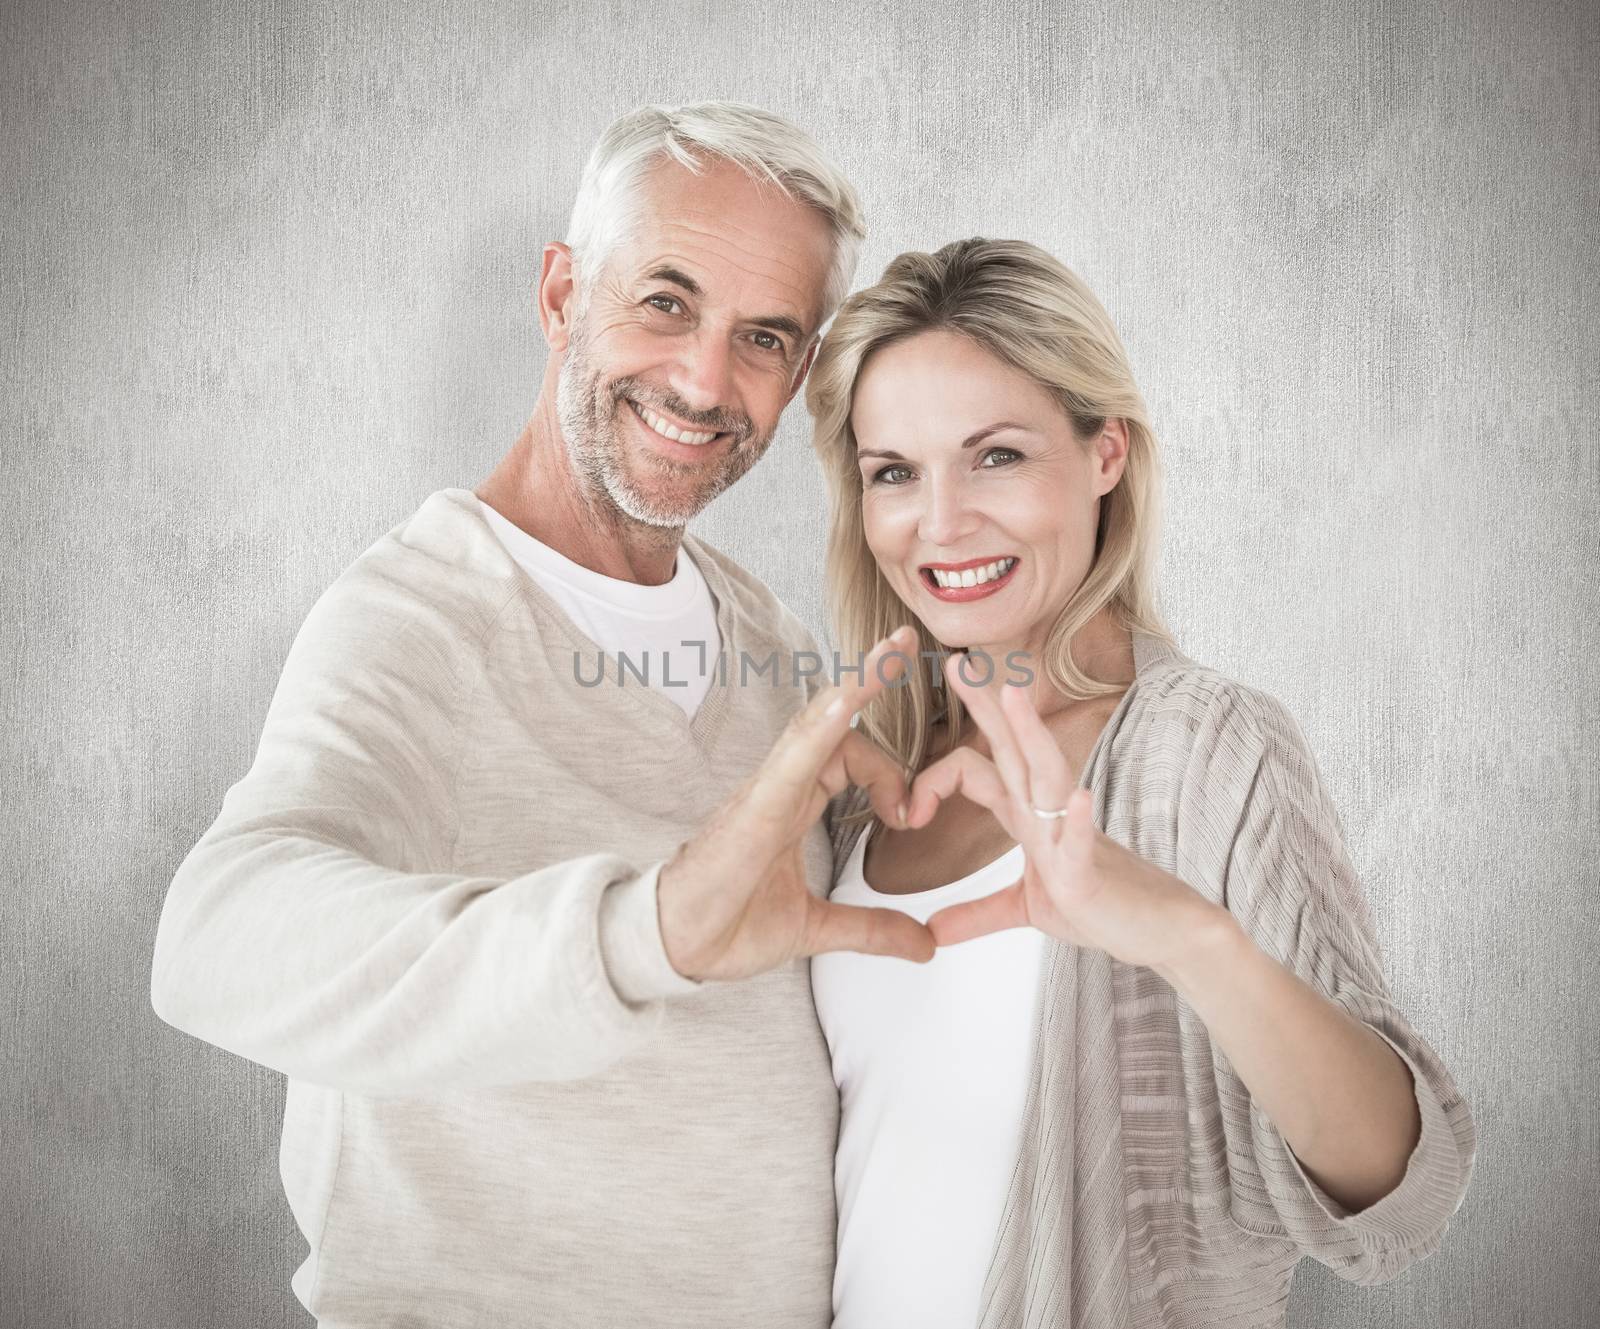 Happy couple forming heart shape with hands against white background